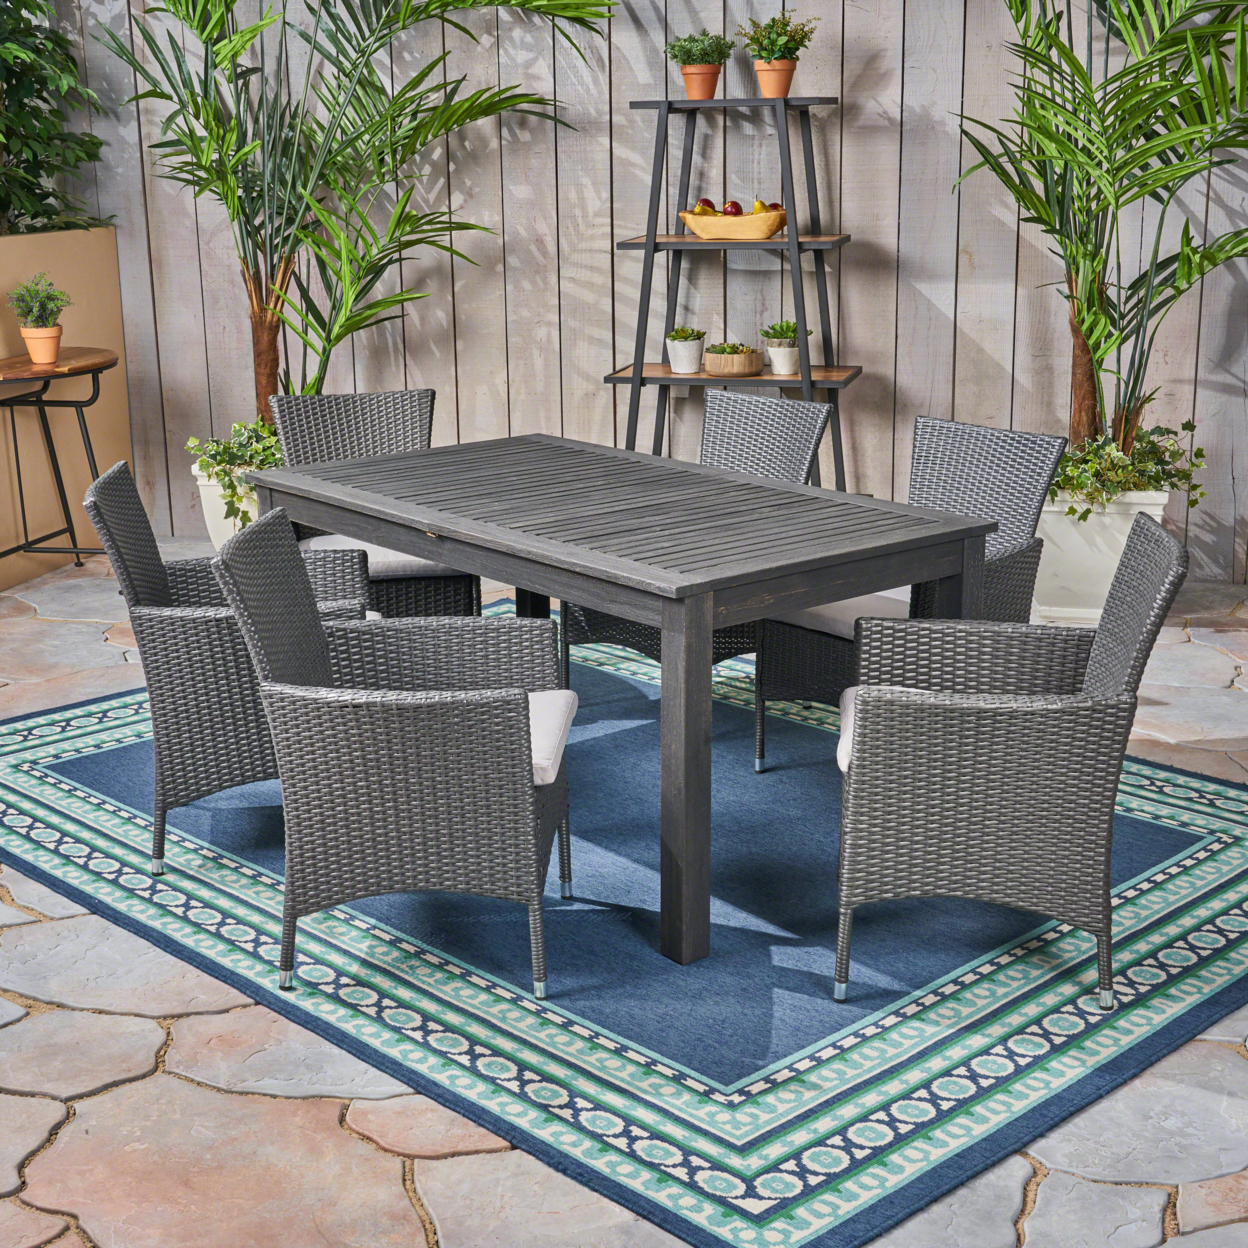 Austin Outdoor Wood And Wicker Expandable Dining Set - Dark Gray + Gray + Silver, 9-Piece Set